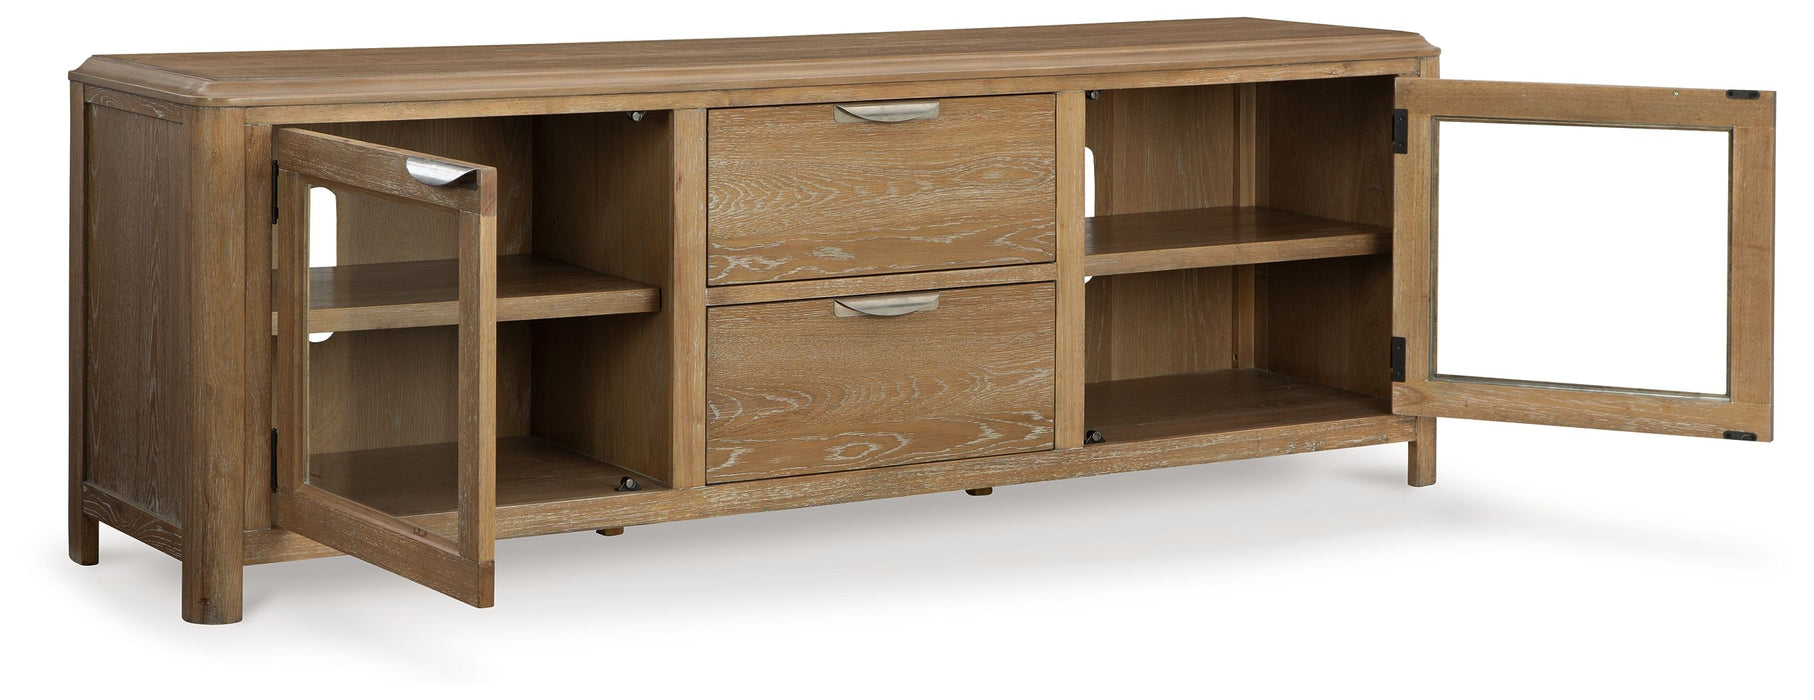 Rencott - Light Brown - Extra Large TV Stand